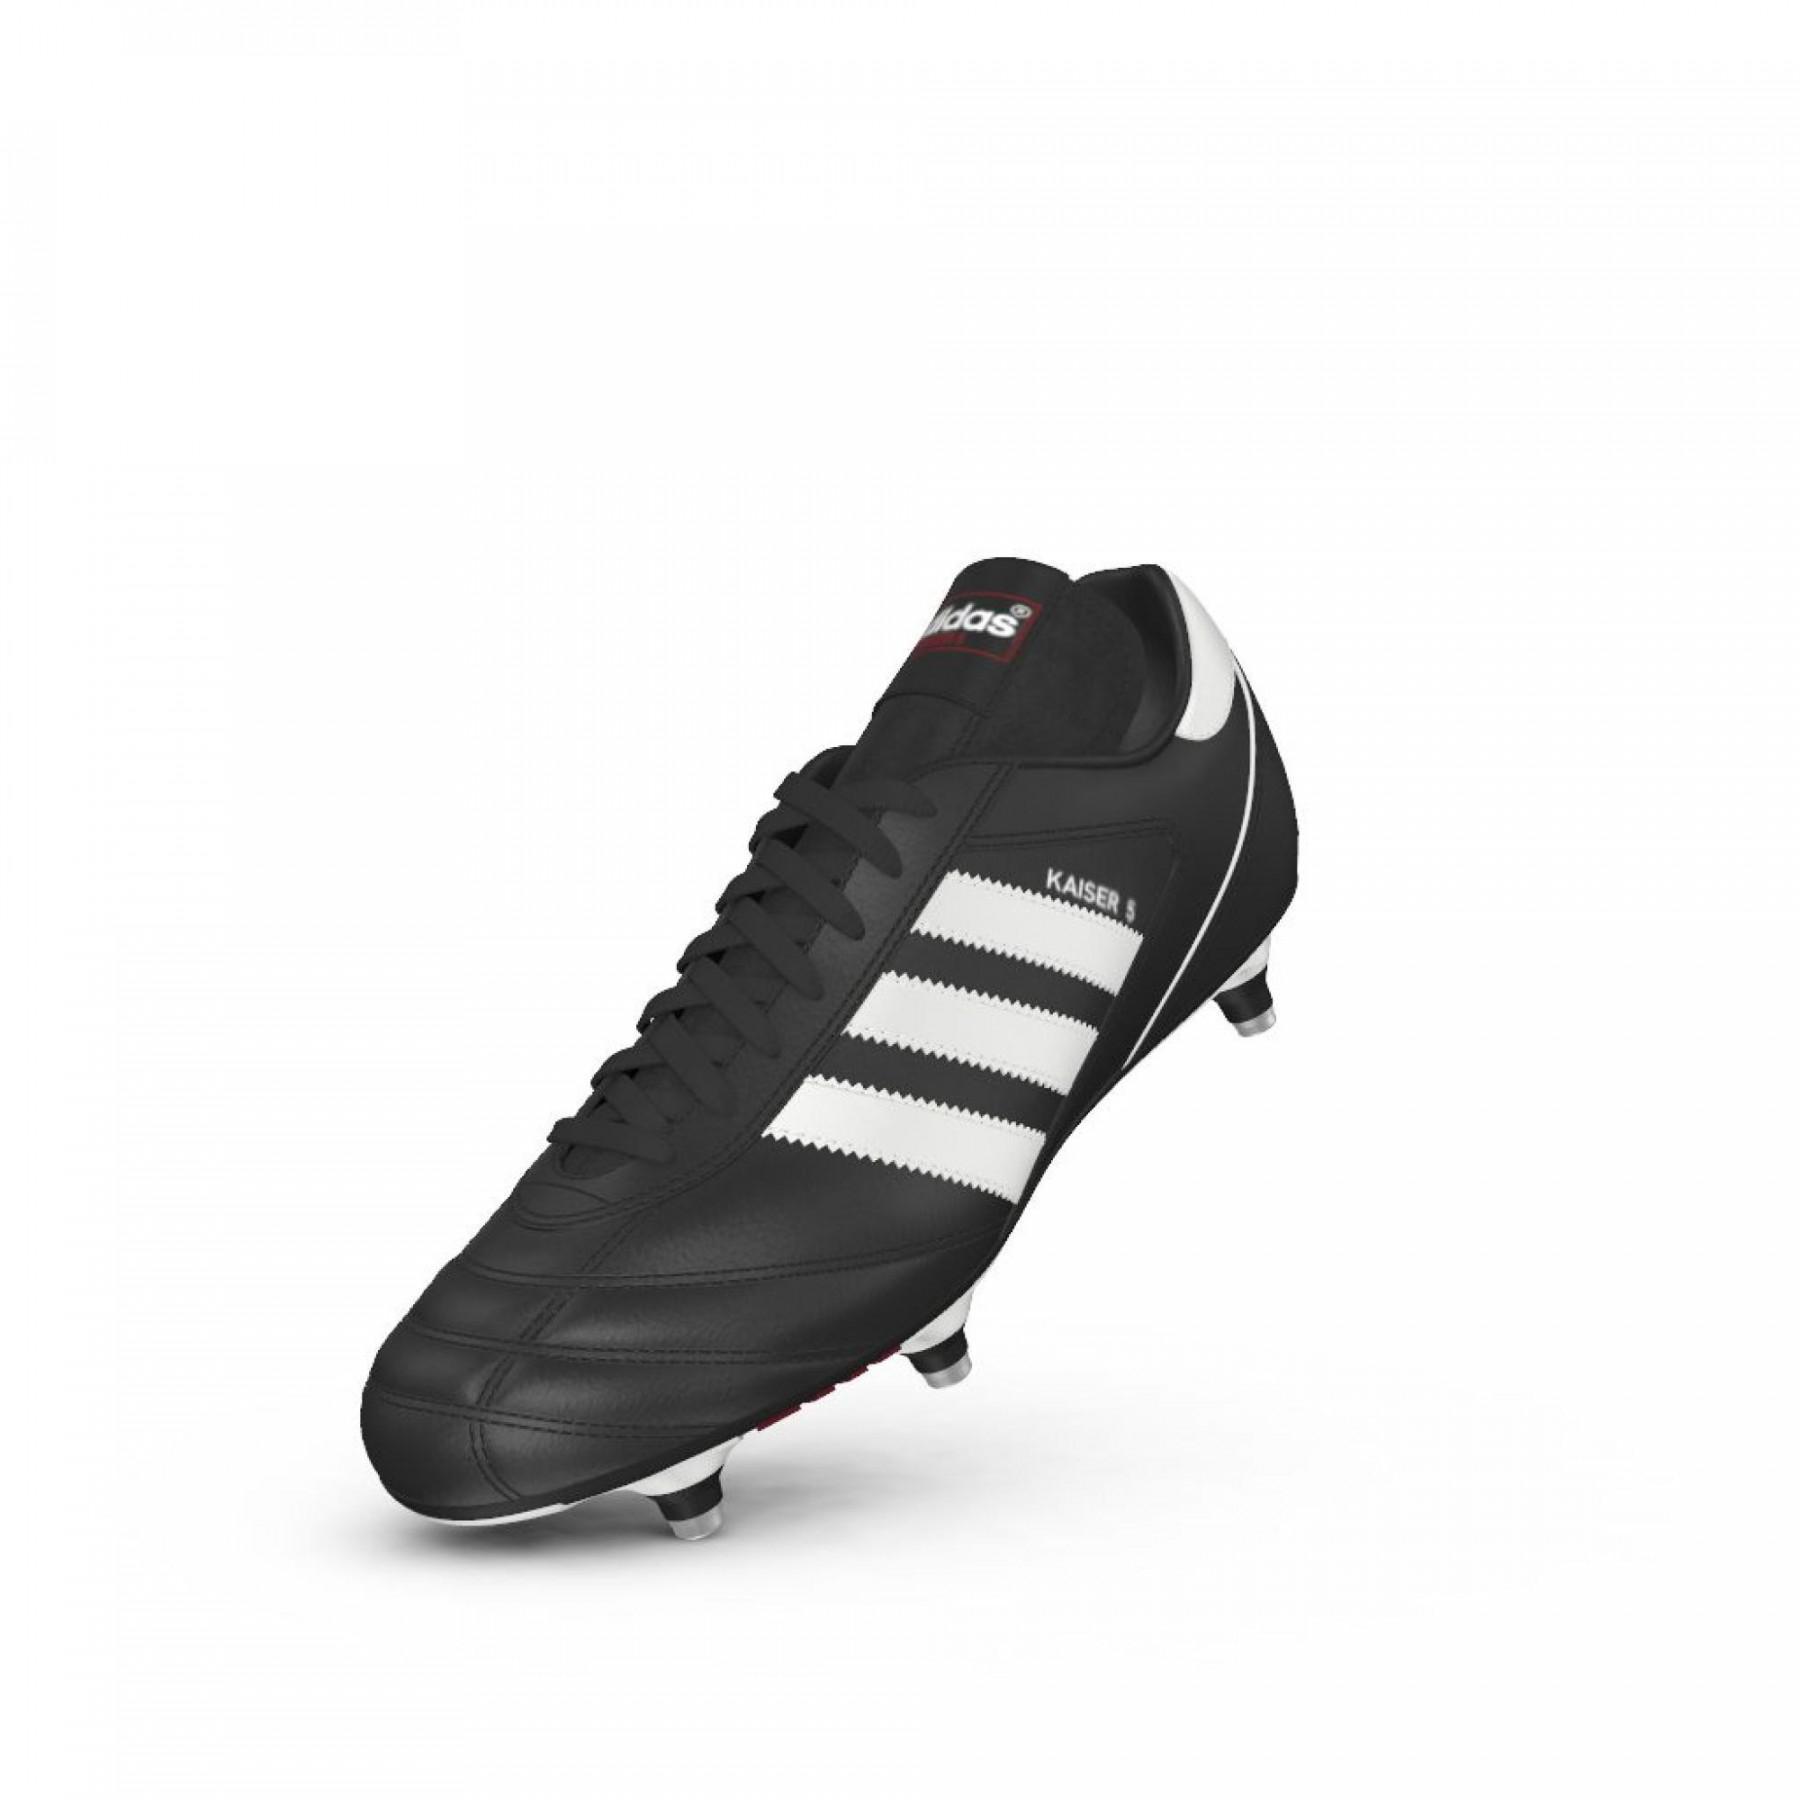 adidas Kaiser 5 CUP - Soft ground (SG) - Surfaces - Boots